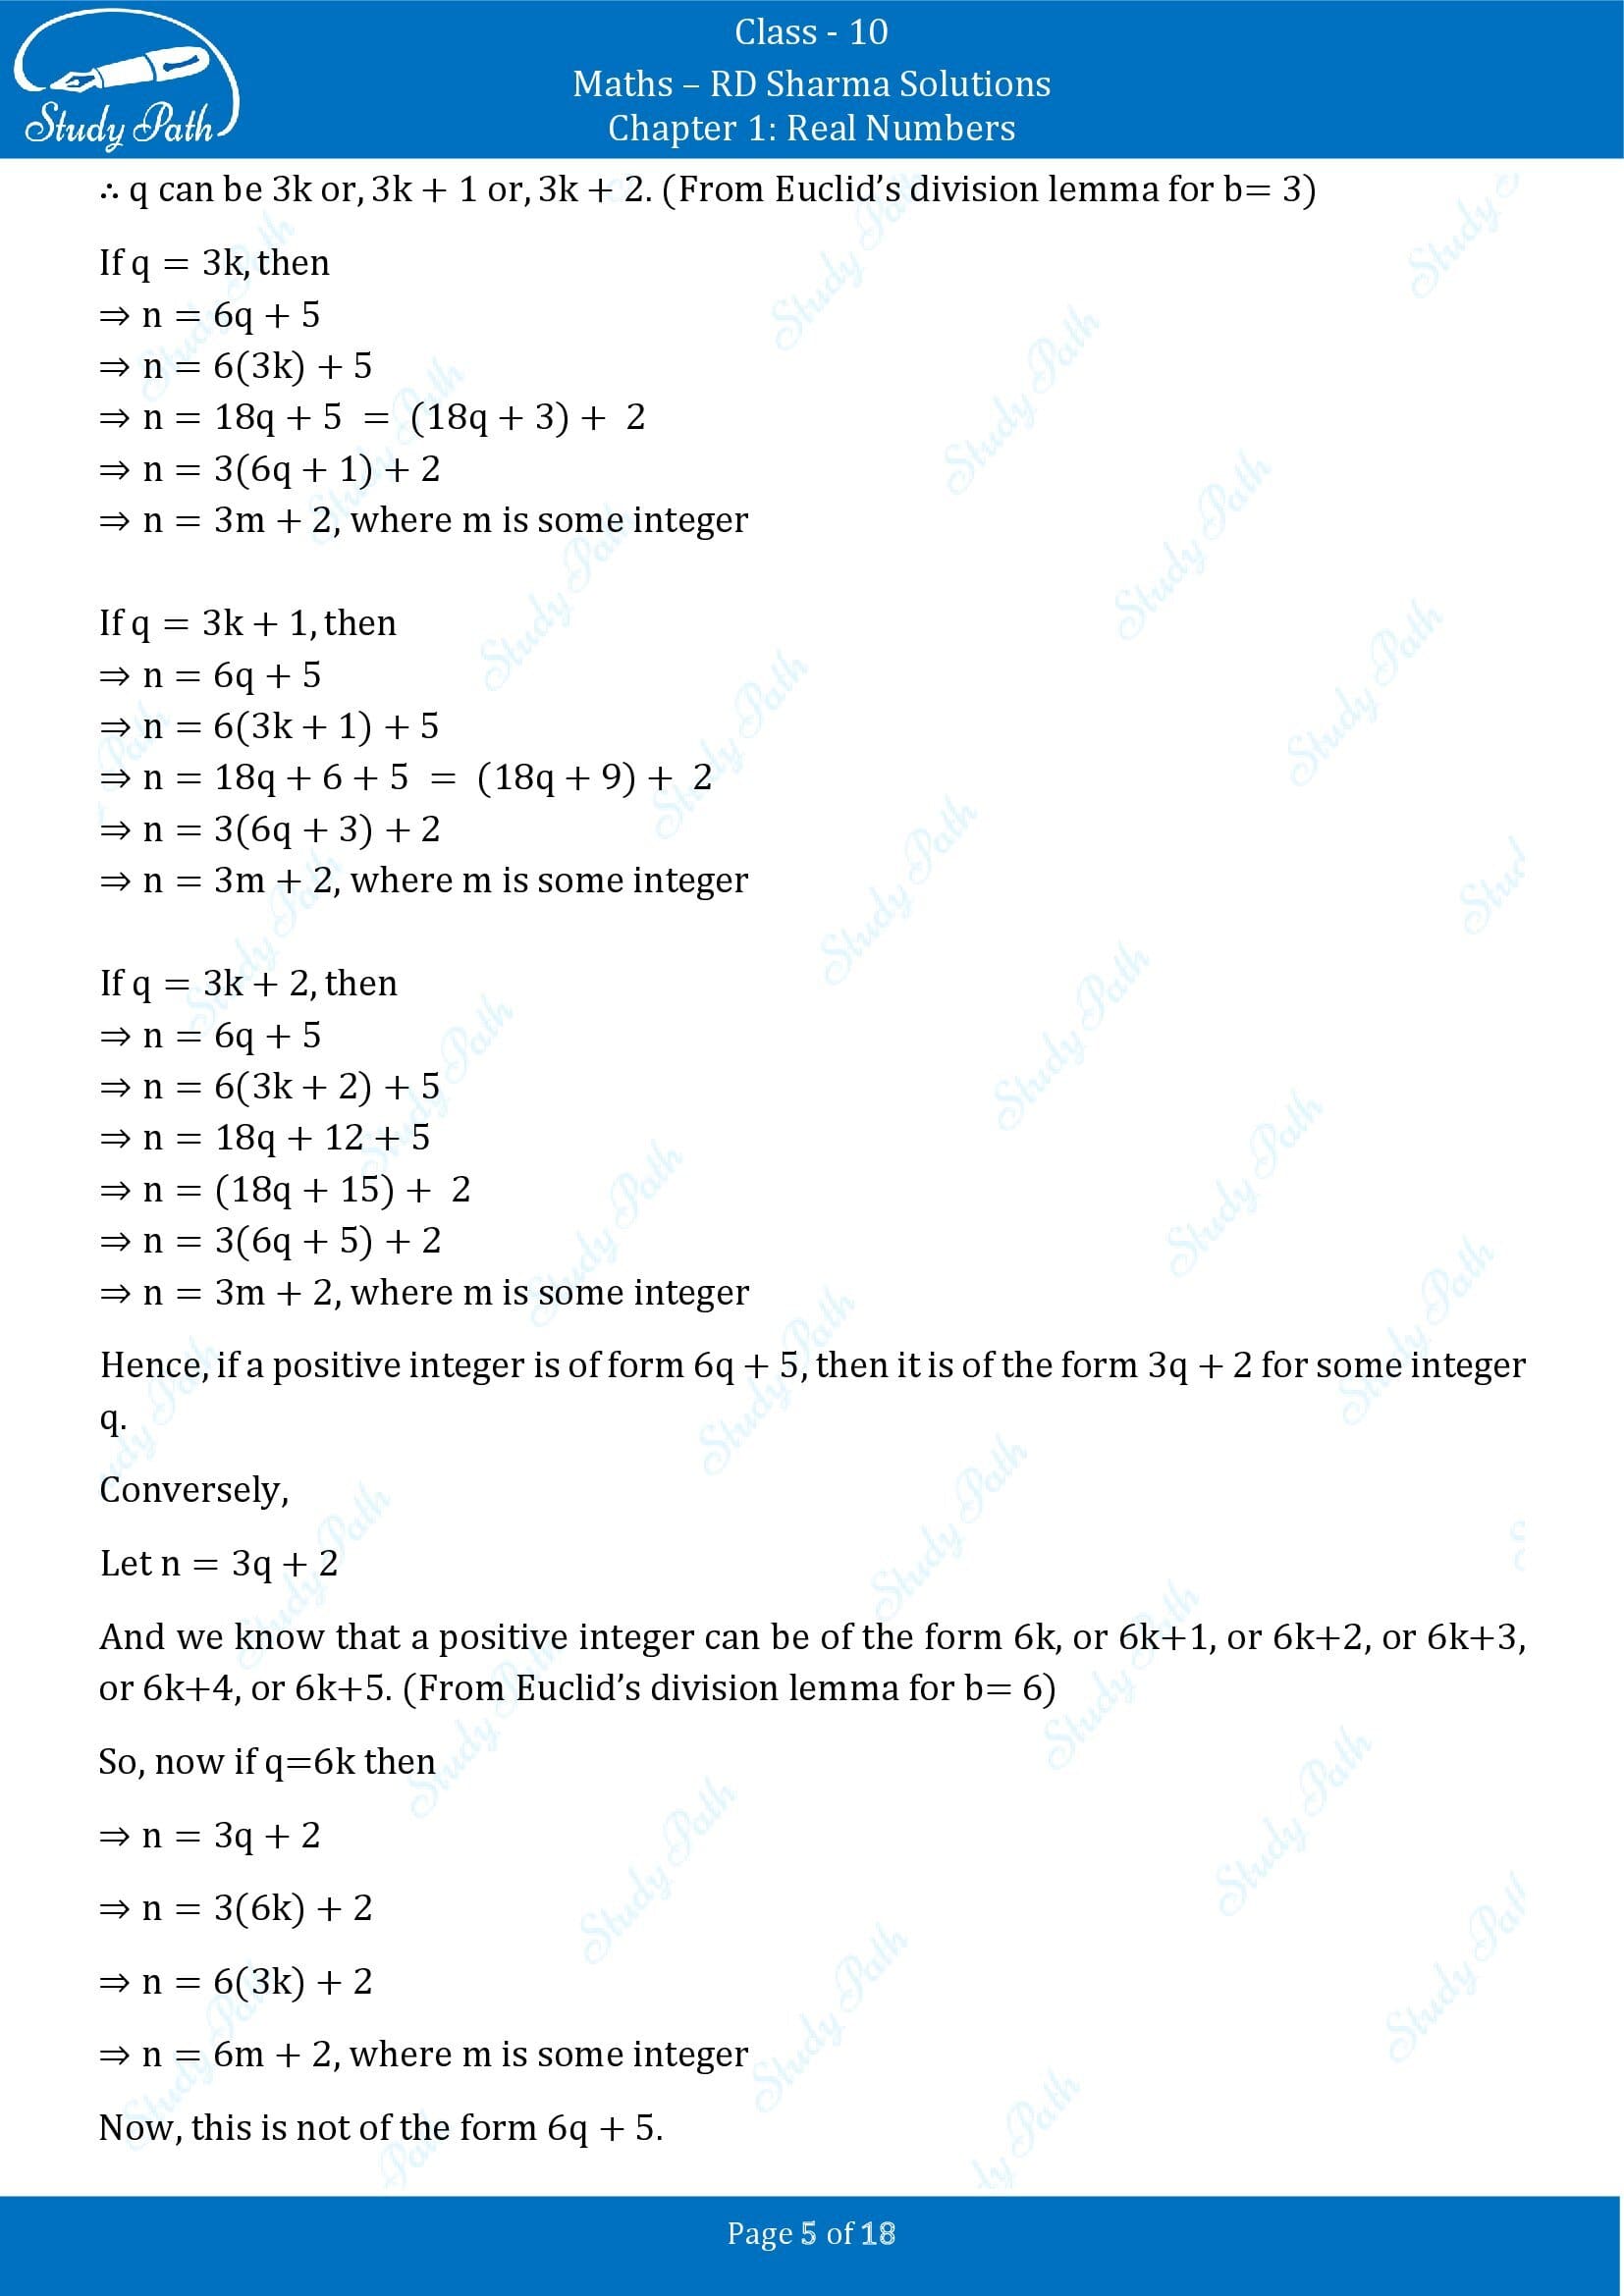 RD Sharma Solutions Class 10 Chapter 1 Real Numbers Exercise 1.1 00005